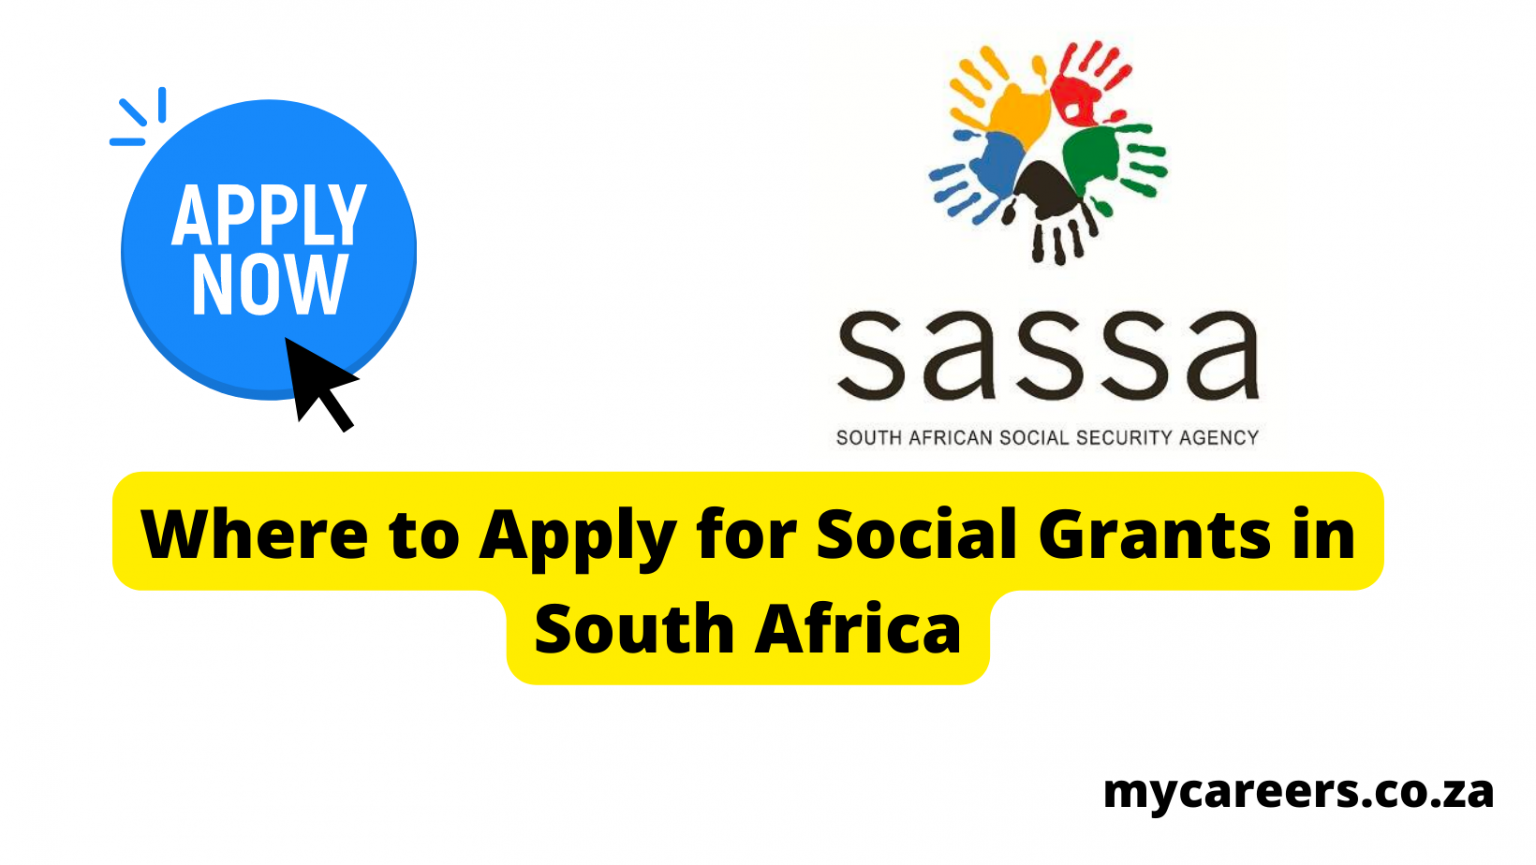 where-to-apply-for-social-grants-in-south-africa-mycareers-co-za